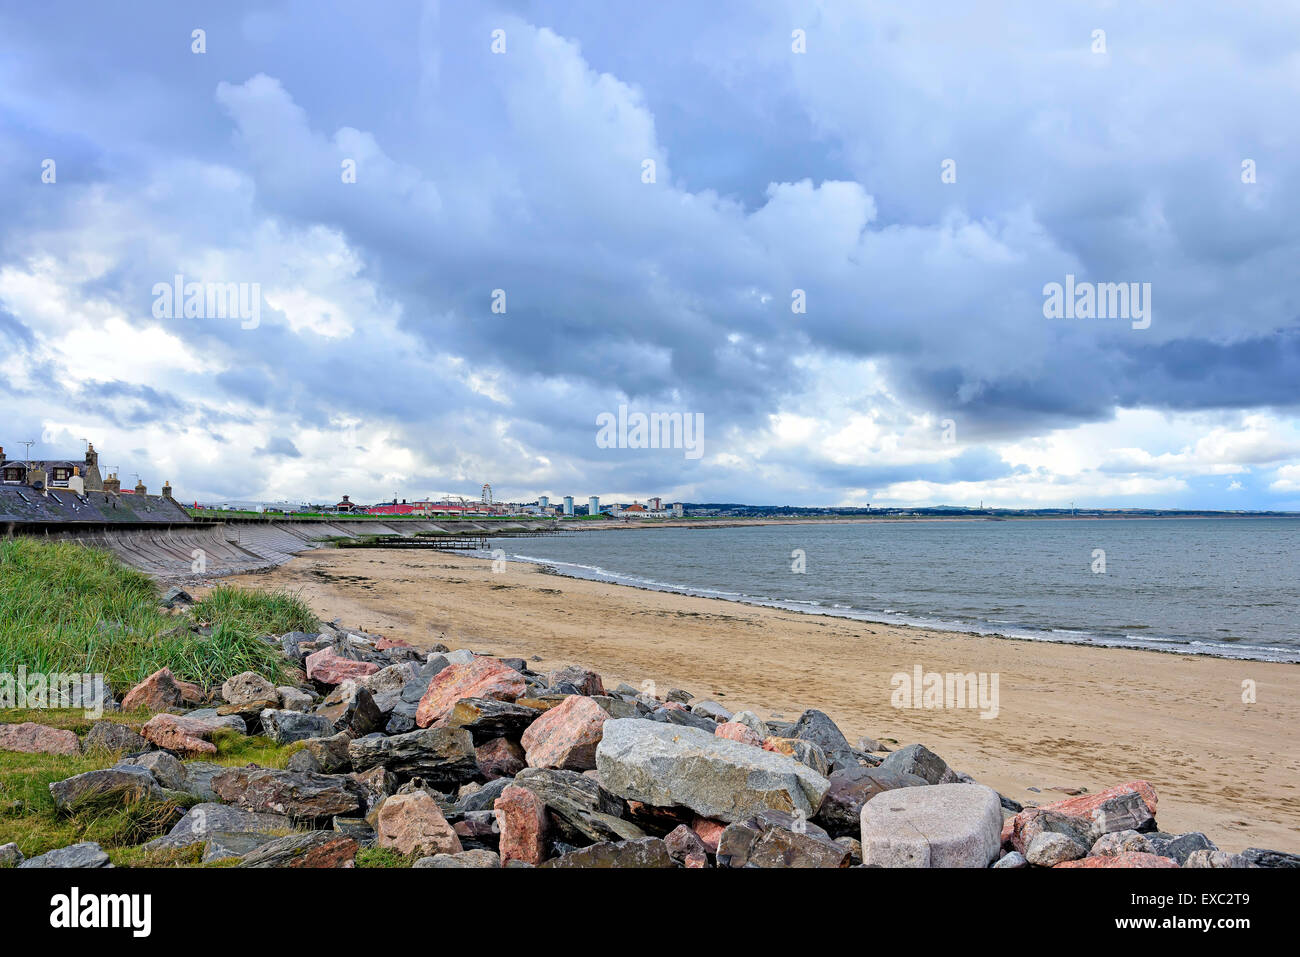 View of Aberdeen beach. Aberdeen is Scotland's third most populous city and the United Kingdom's 37th most populous area. Stock Photo